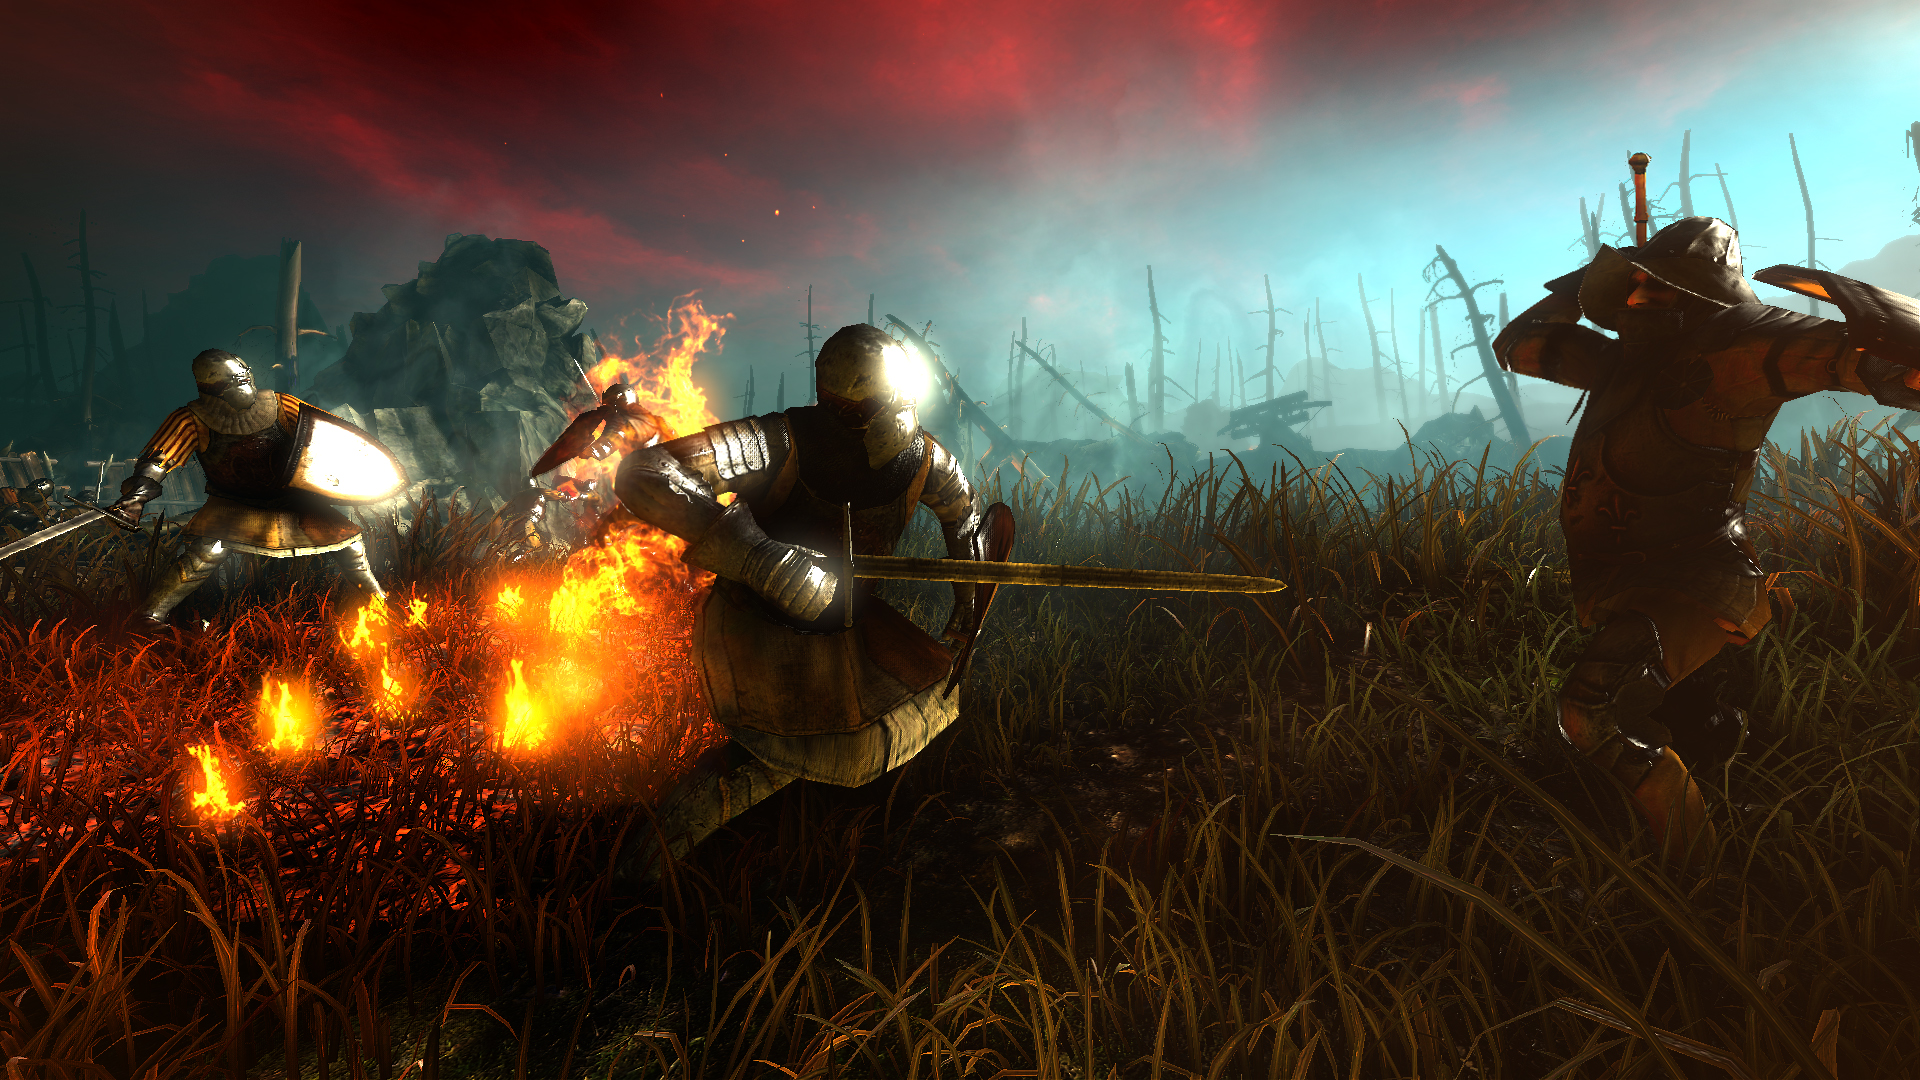 Images - The Witcher 2: Assassins of Kings - ModDB